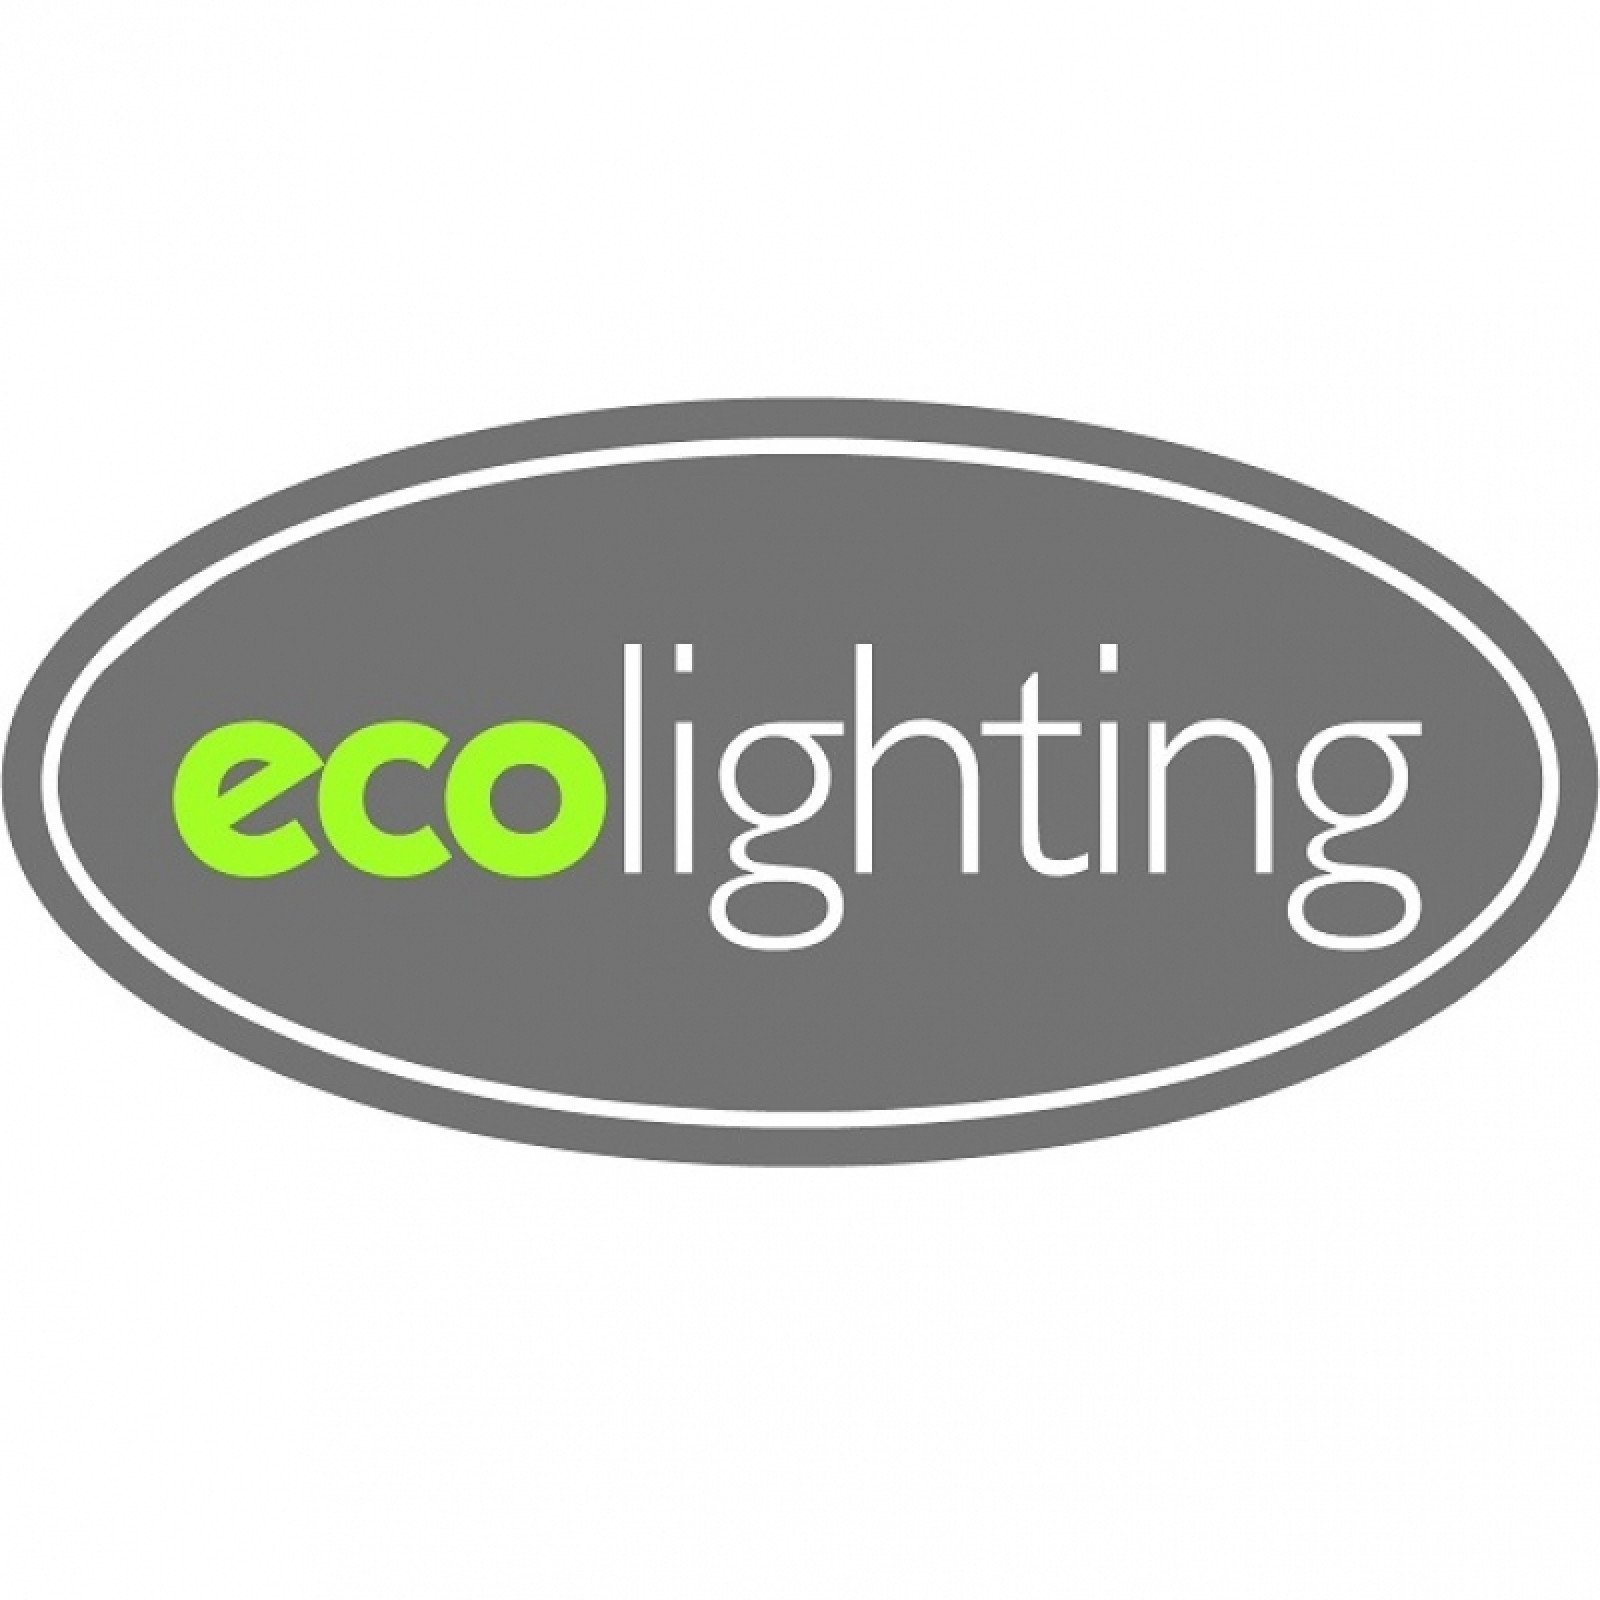 Recycling lamps and the WEEE regulations